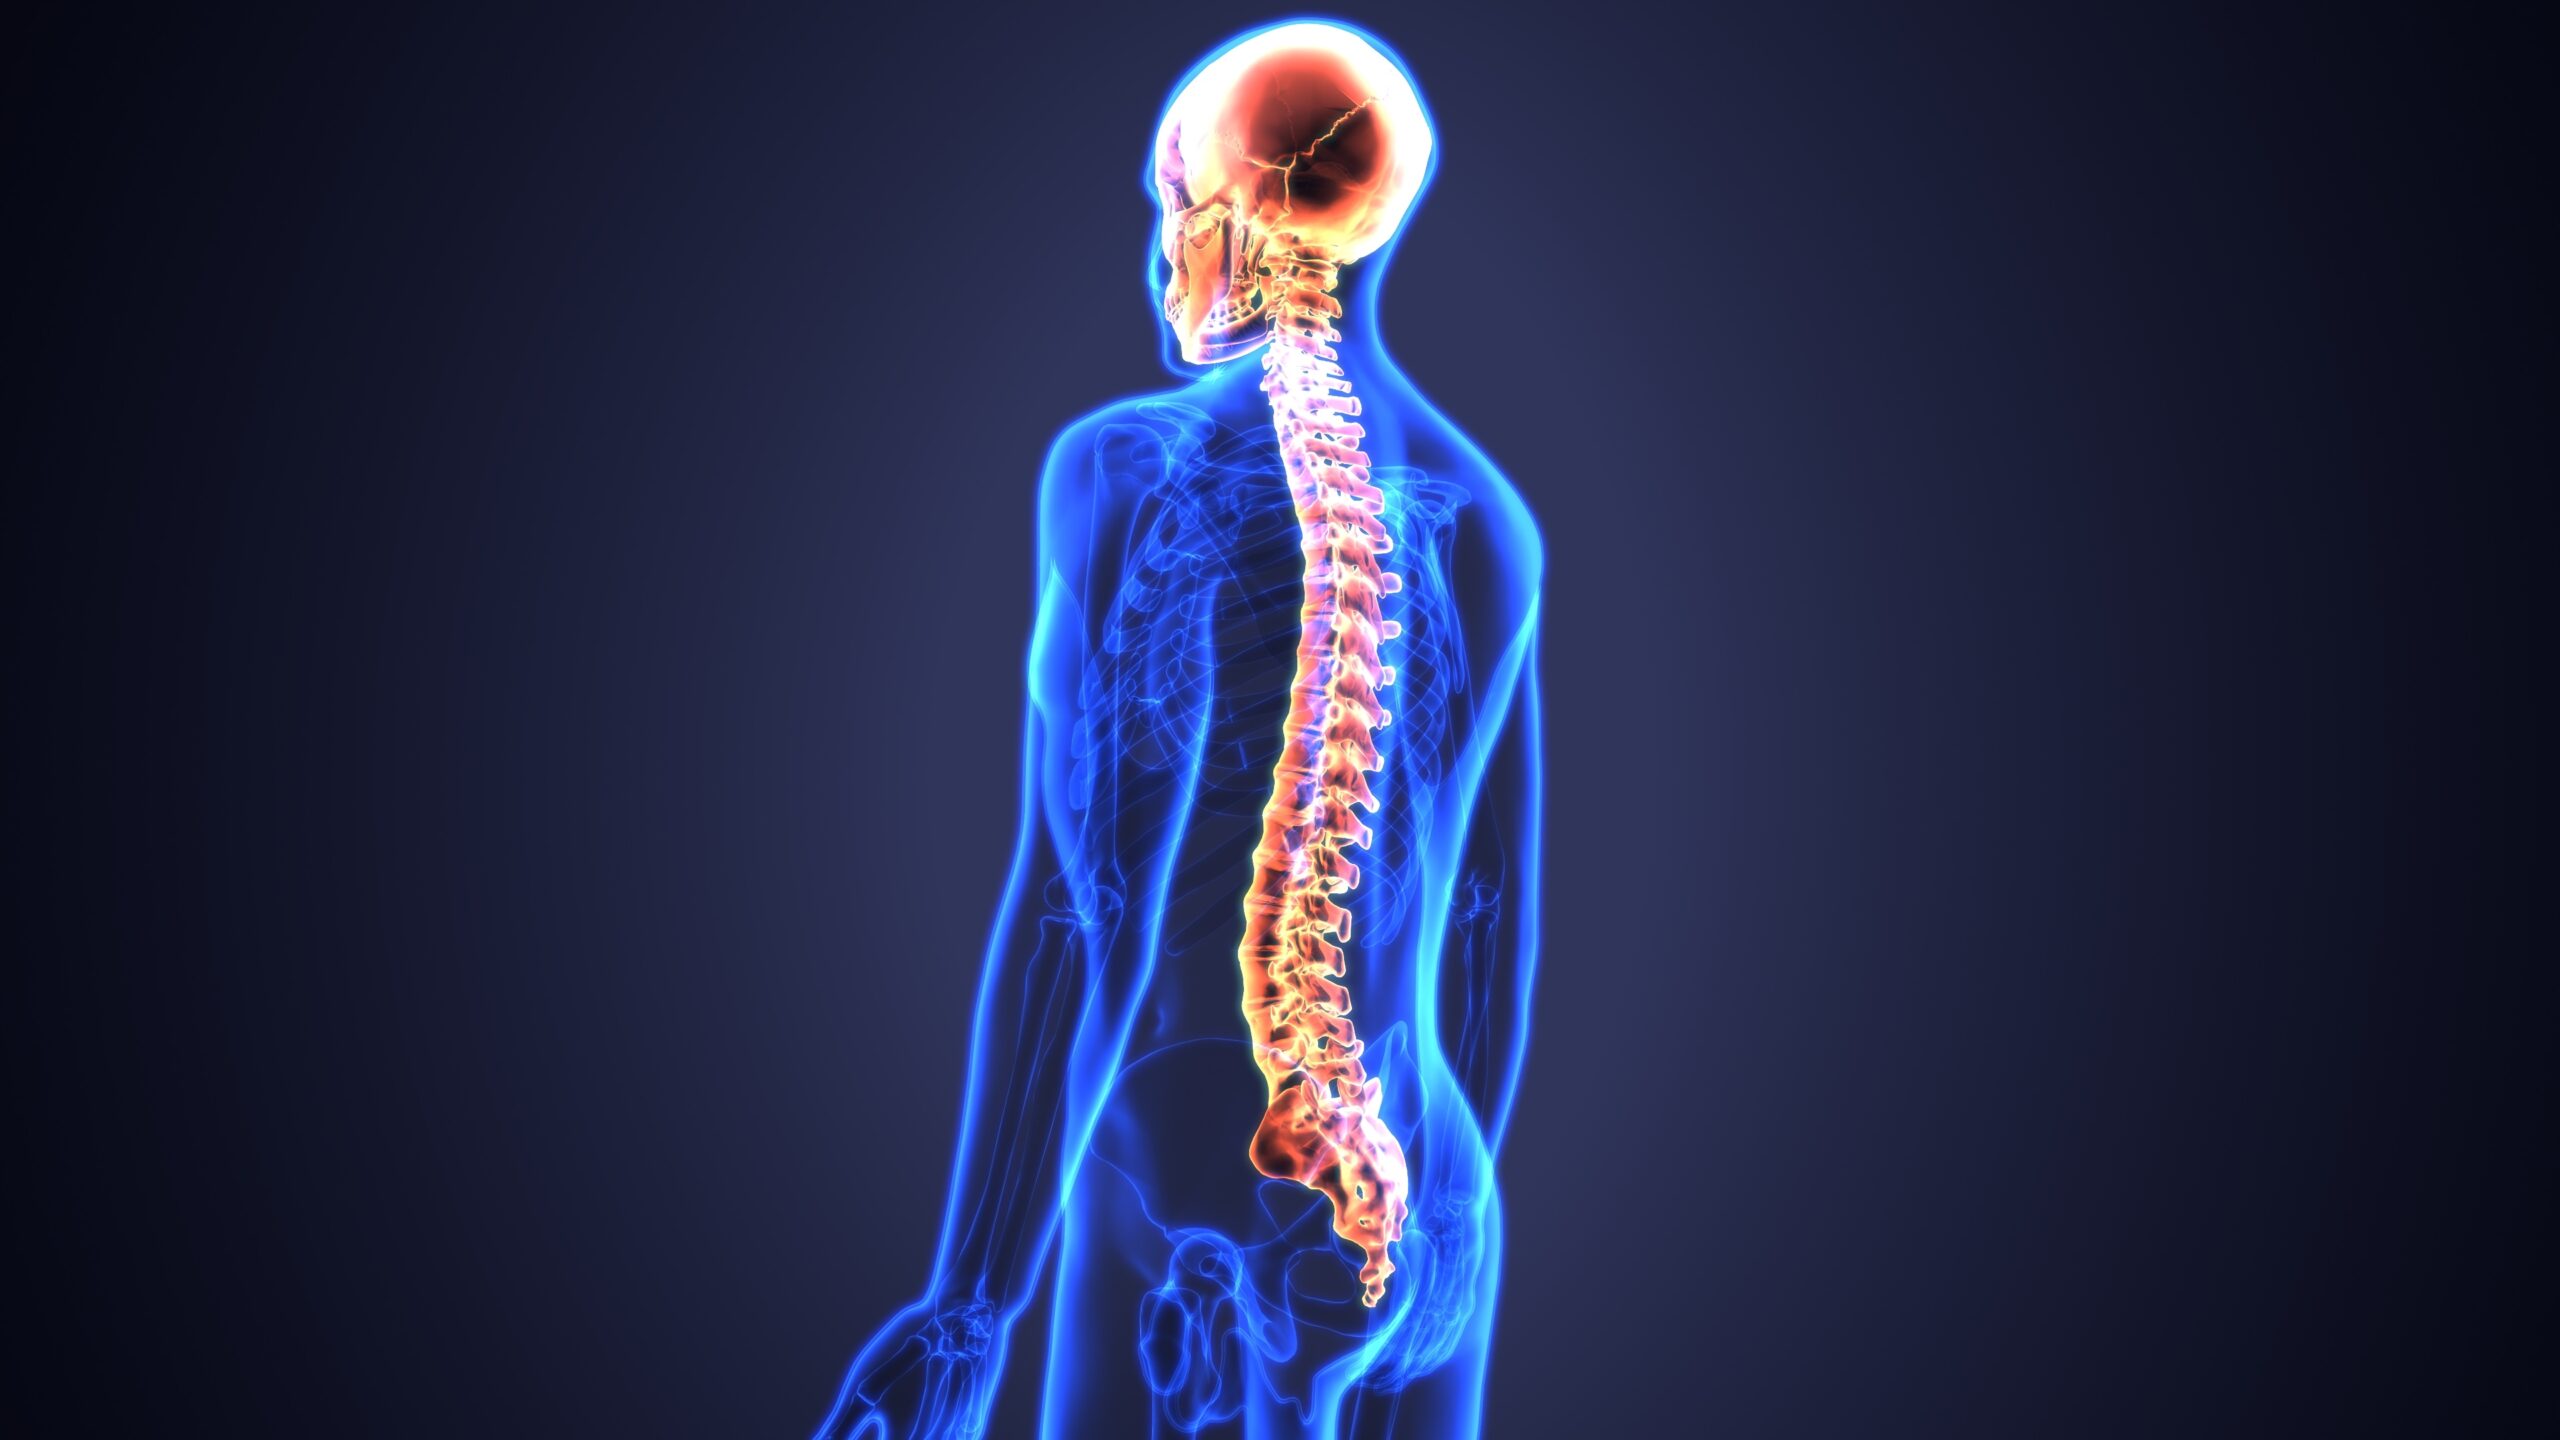 Stem Cell Treatment Helps Patients With Spinal Cord Injury Regain Movement